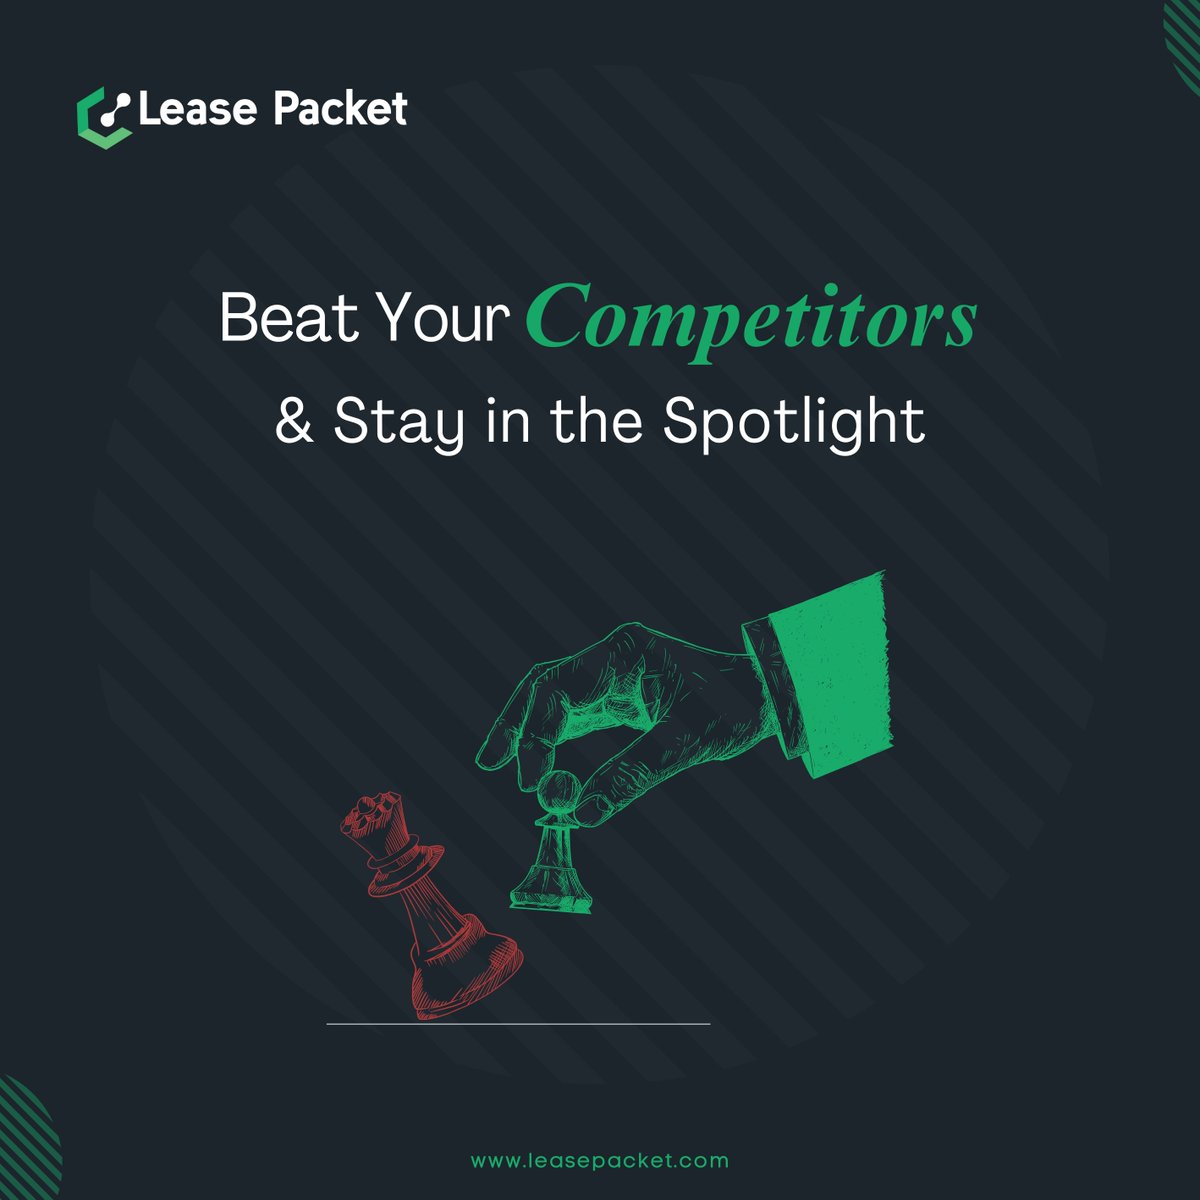 Outshine the competition with Lease Packet—where speed meets reliability, keeping you always in the spotlight.
#server #dedicatedserver #cloudserver #webserver #linuxserver #windowsserver #serverprovider #serversolutions #leasepacket #serversupport #servers